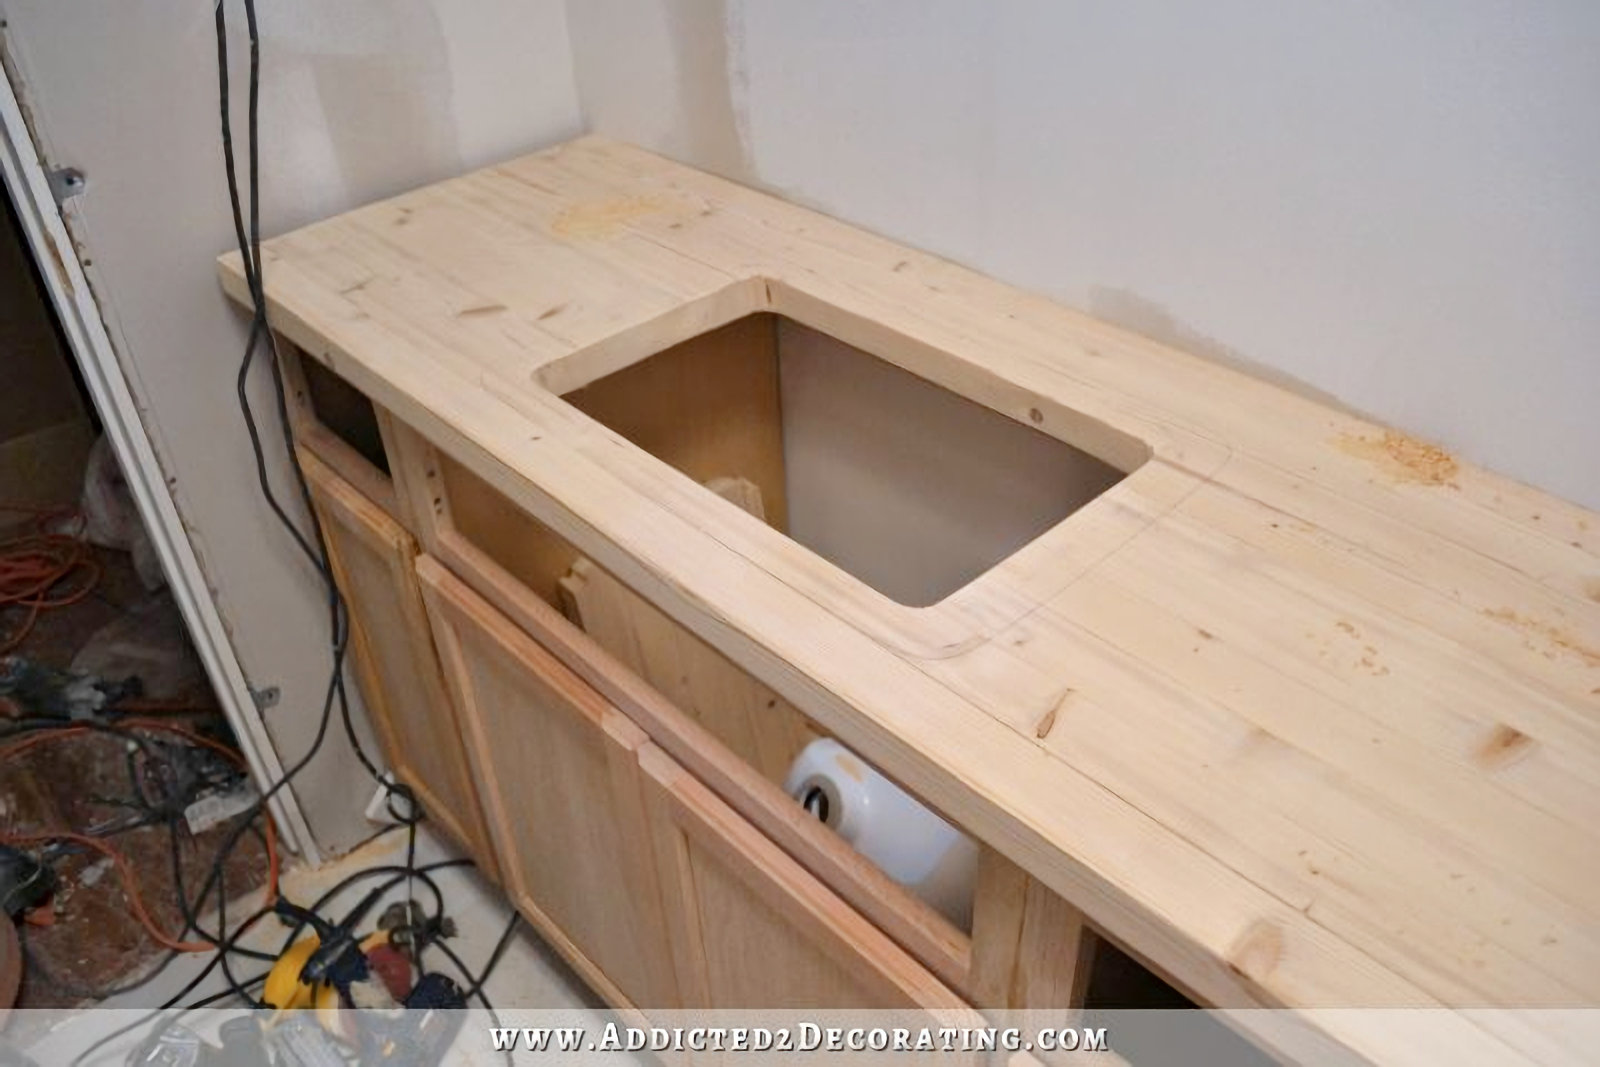 DIY pine butcherblock style countertop with hole cut out for undermount sink